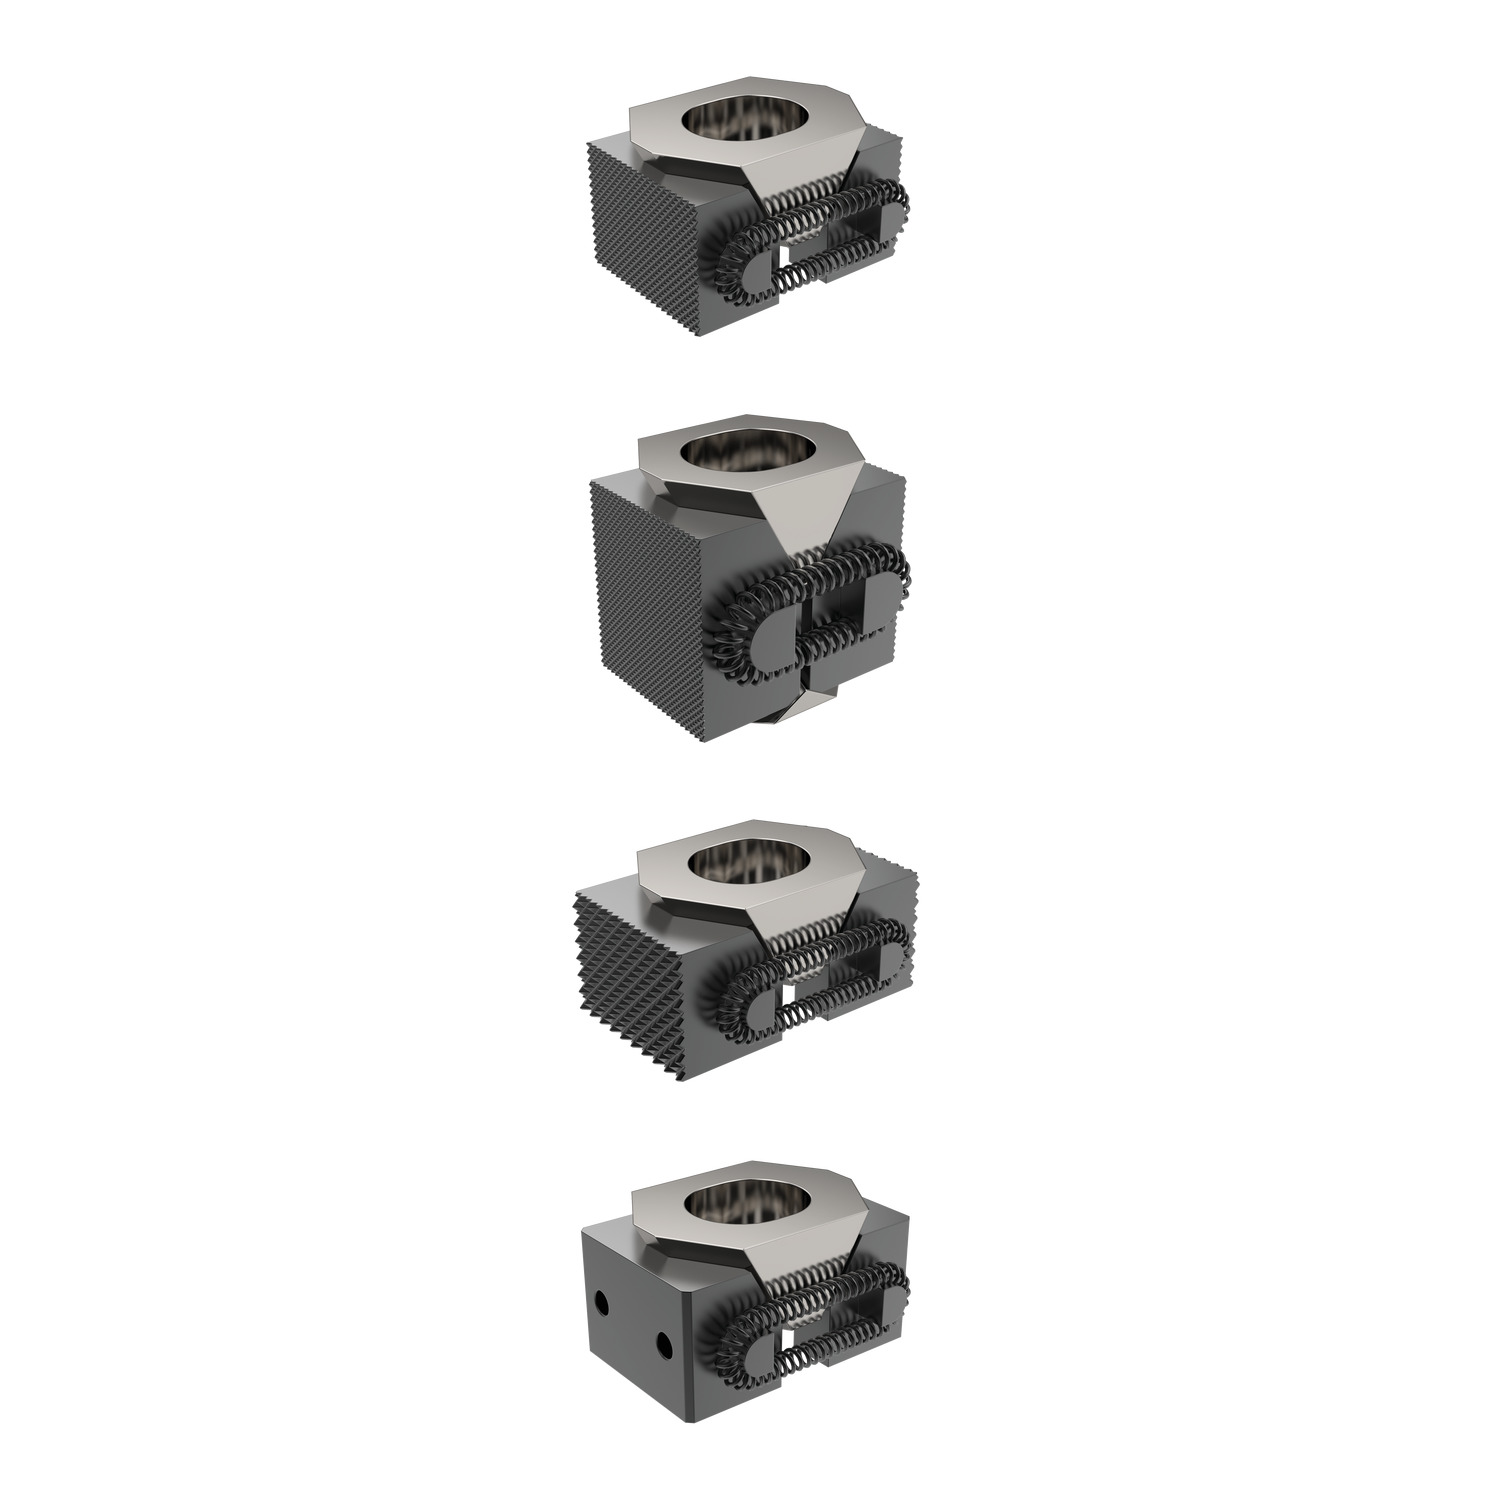 Taper Clamps Hold down action taper clamps made from hardened steel. Ideal for both horizontal and vertical clamping of multiple parts. Can be mounted in a threaded hole or t-slot.